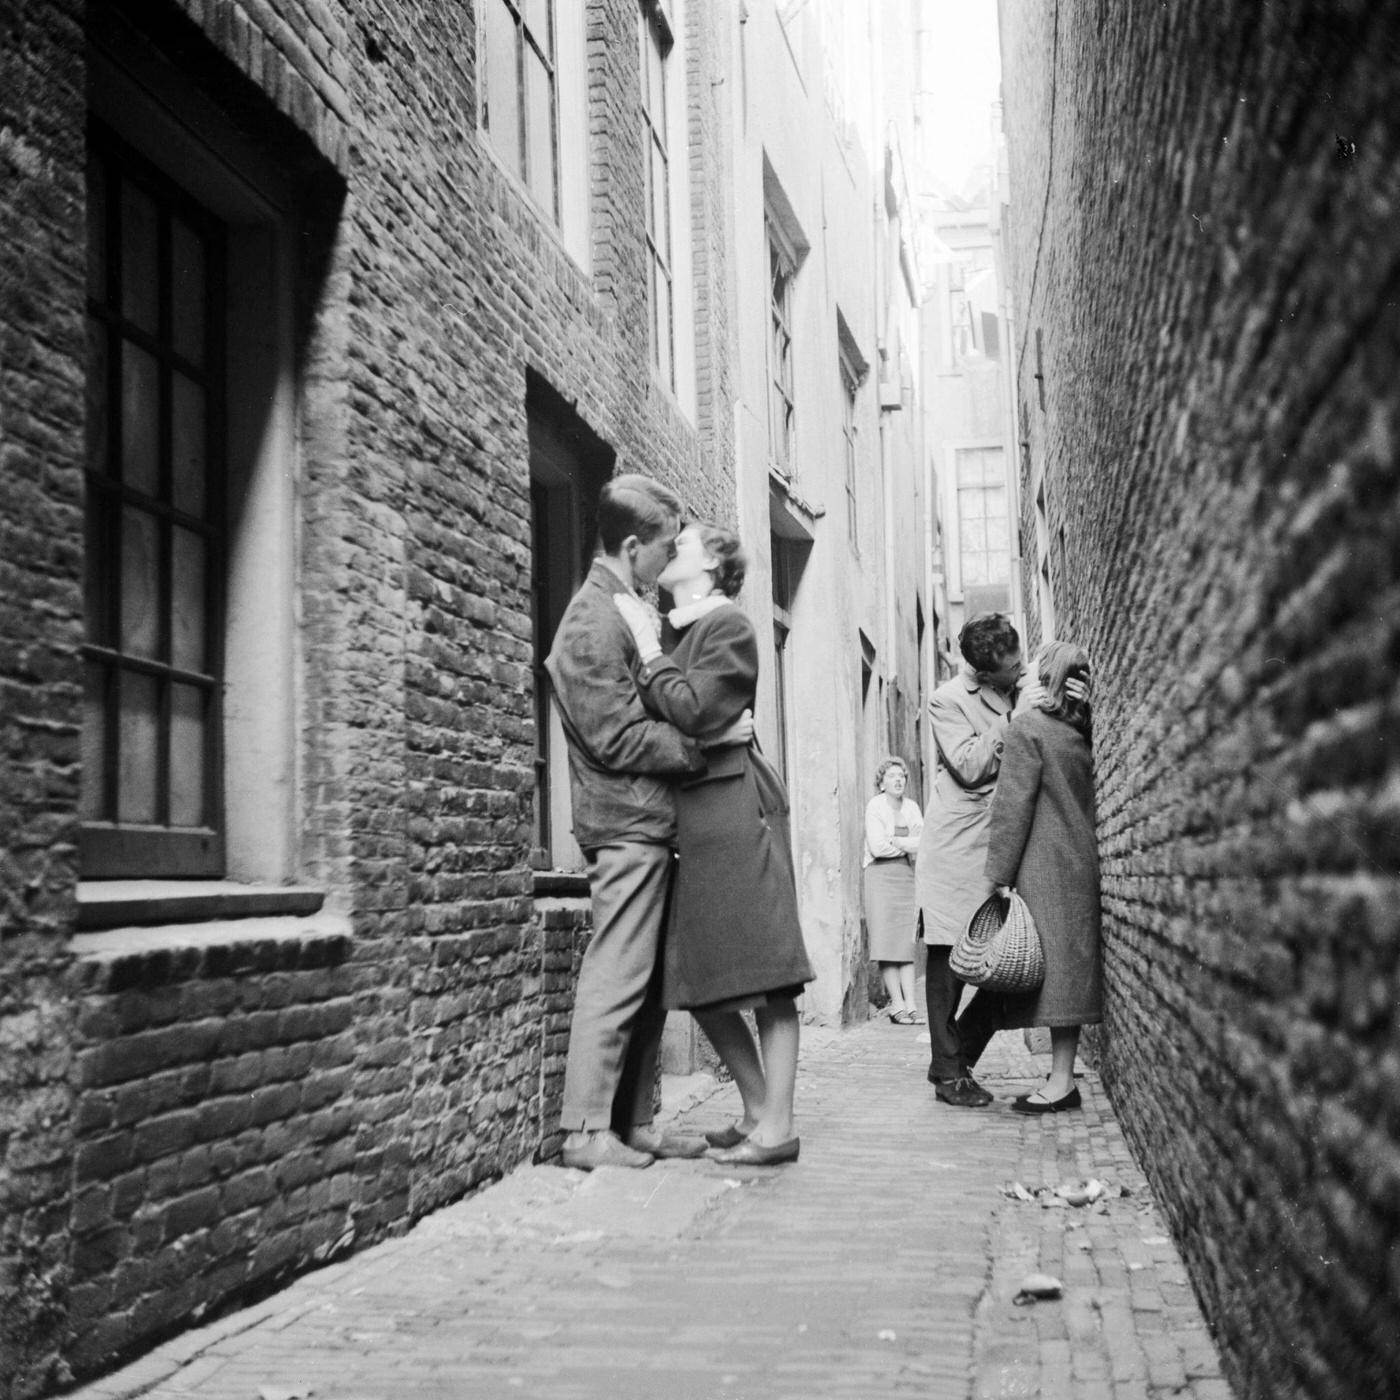 Couples kissing in a narrow alley in the Netherlands, circa 1956.